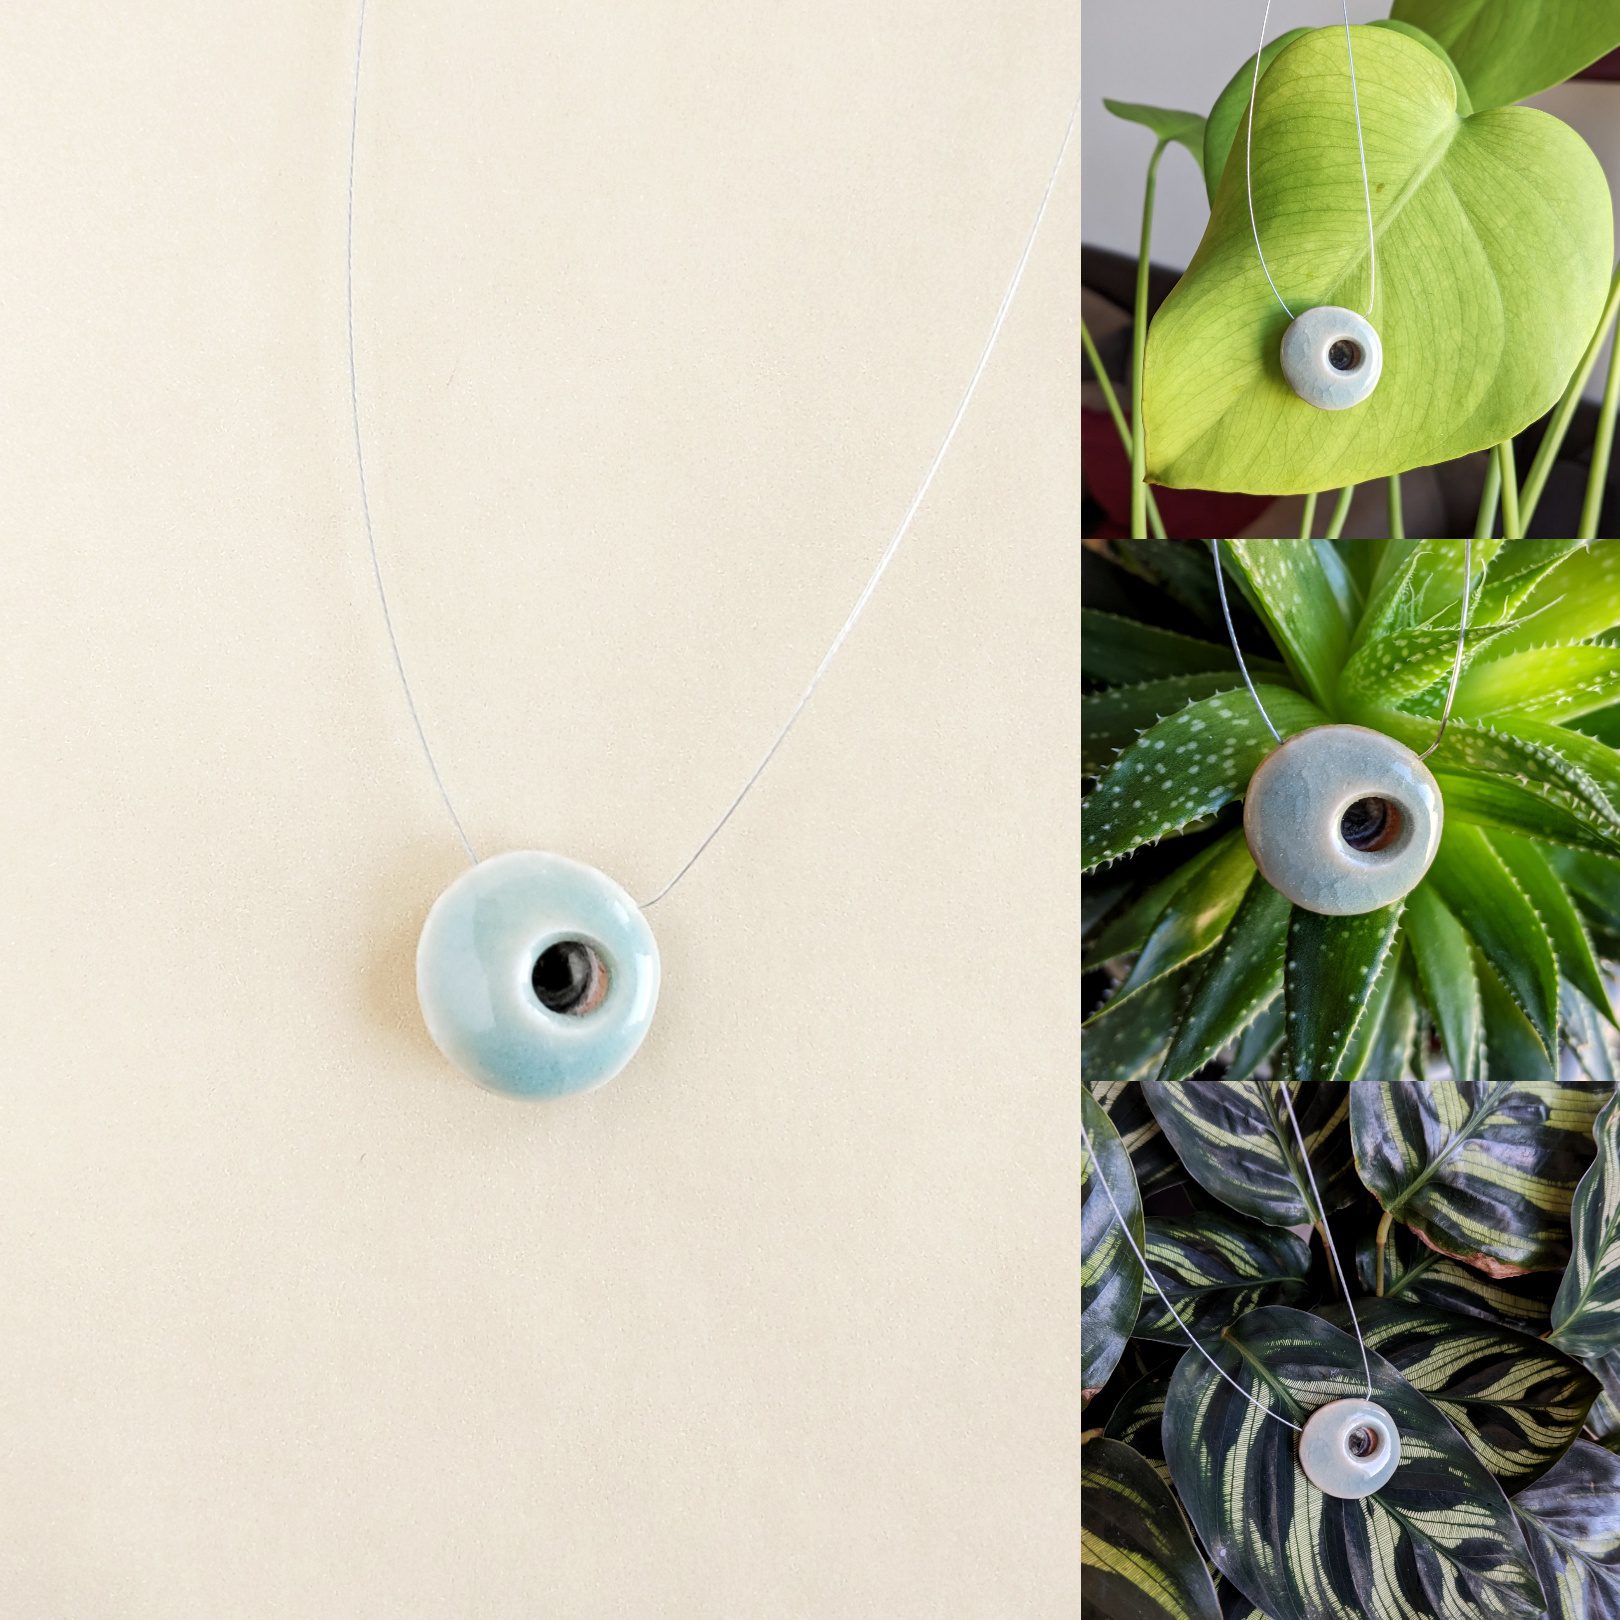 photos of a necklace against a plain background and 3 other photos of necklace photographed with plants behind it